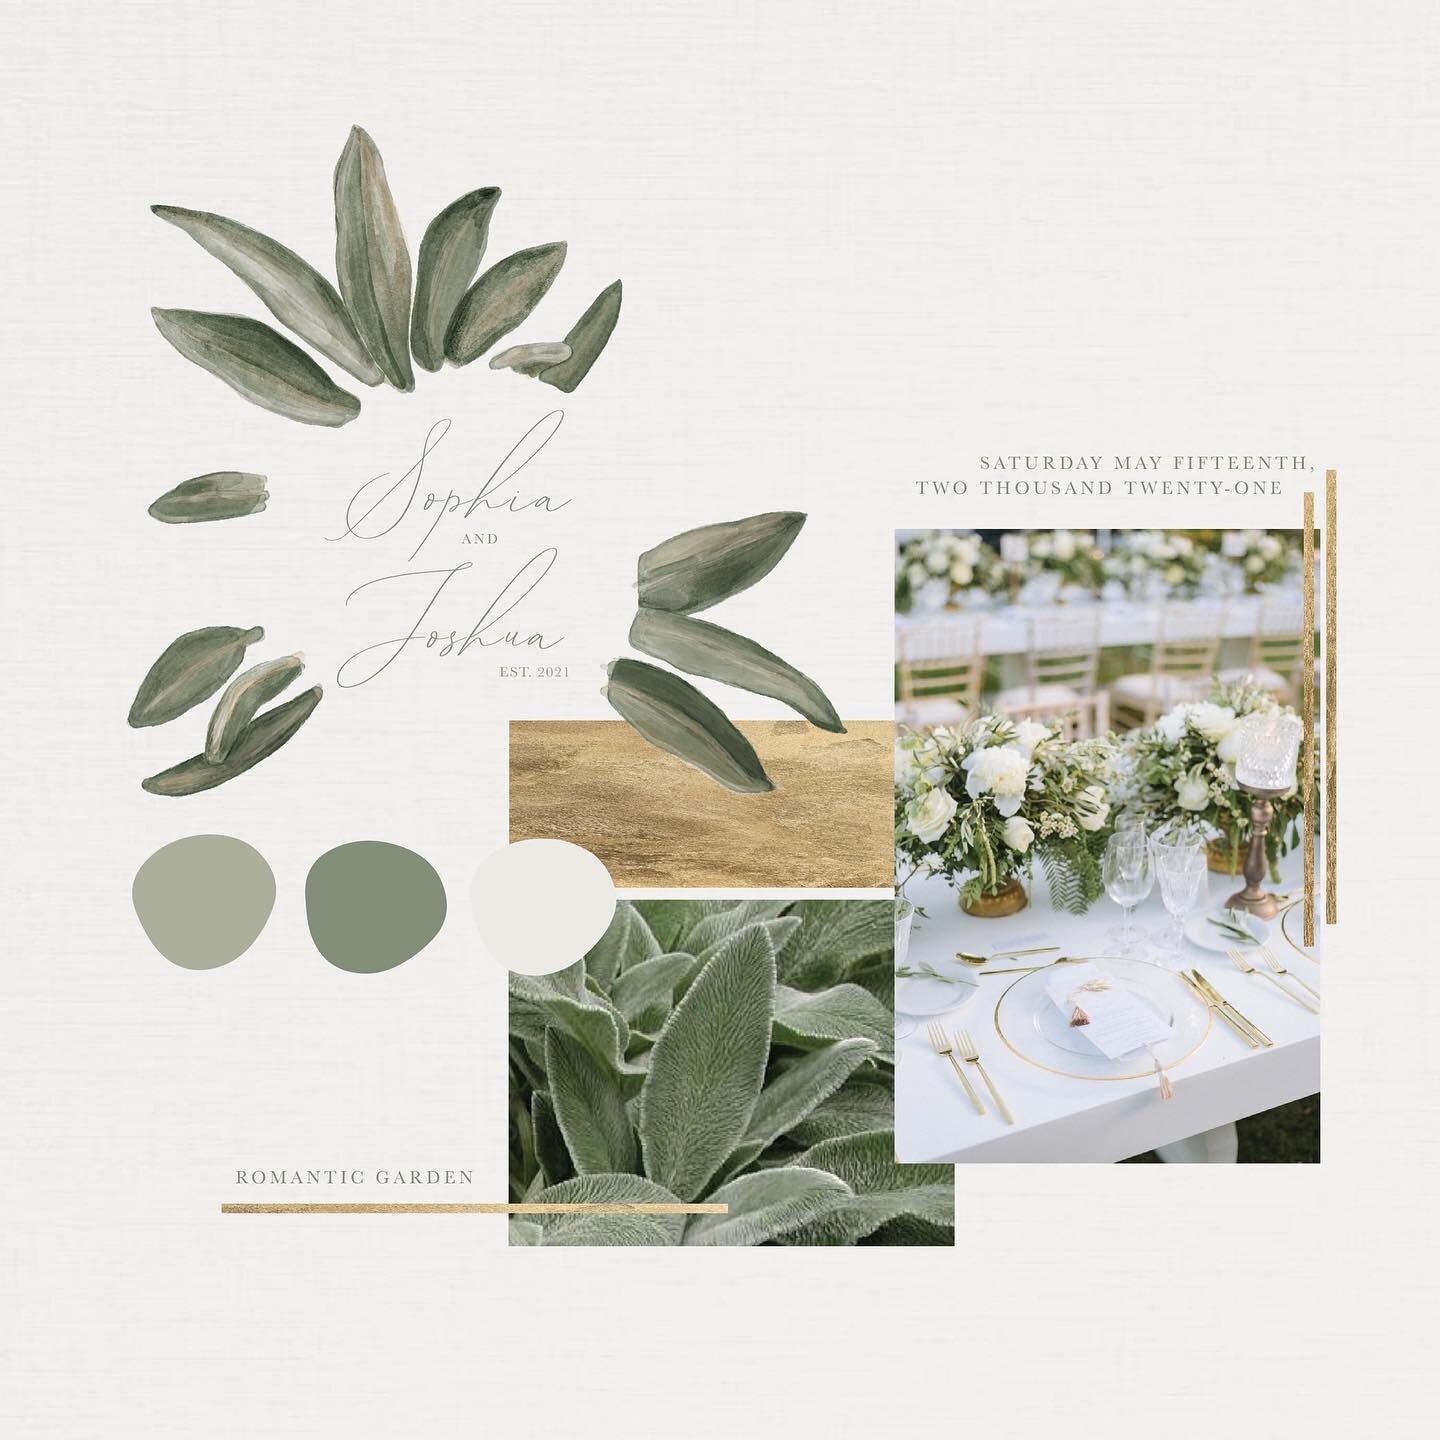 design process step #1 &bull; aesthetic, aesthetic, aesthetic 

This first step is so important and so often skipped. Before designing anyyyything I dive into researching; for weddings, this means learning more about the venue, the couple, and asking